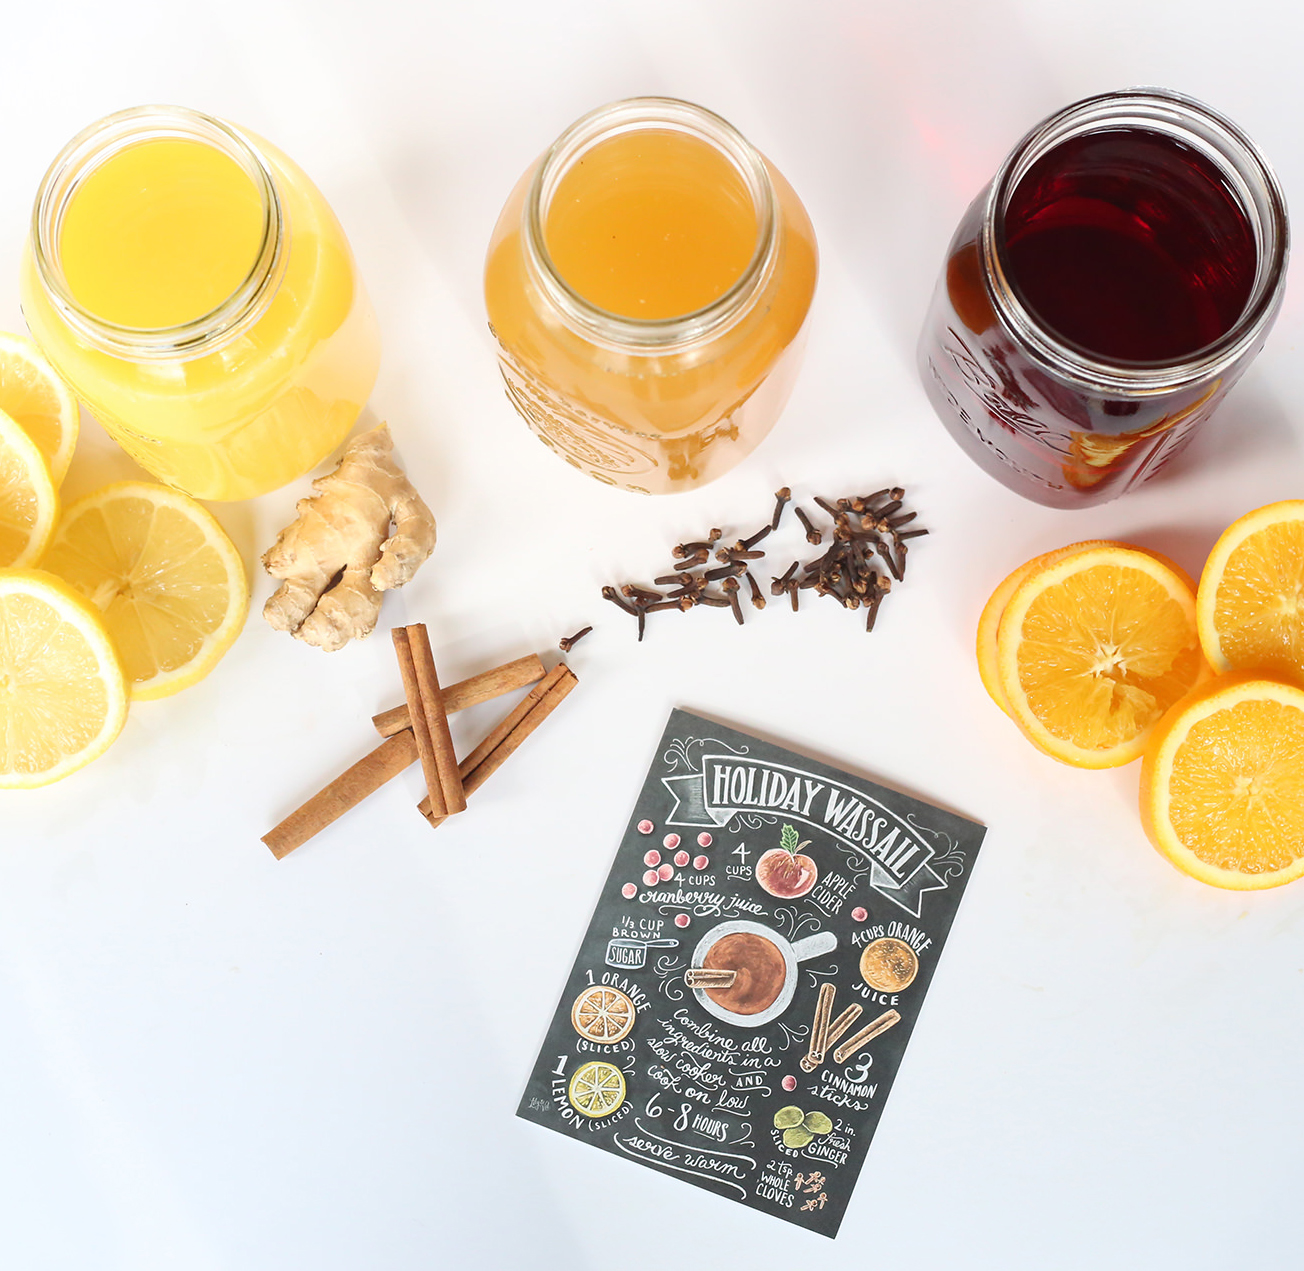 One perfect concoction of Christmas memories and Christmas aromas is found in holiday Wassail, a must-have drink for the holidays.